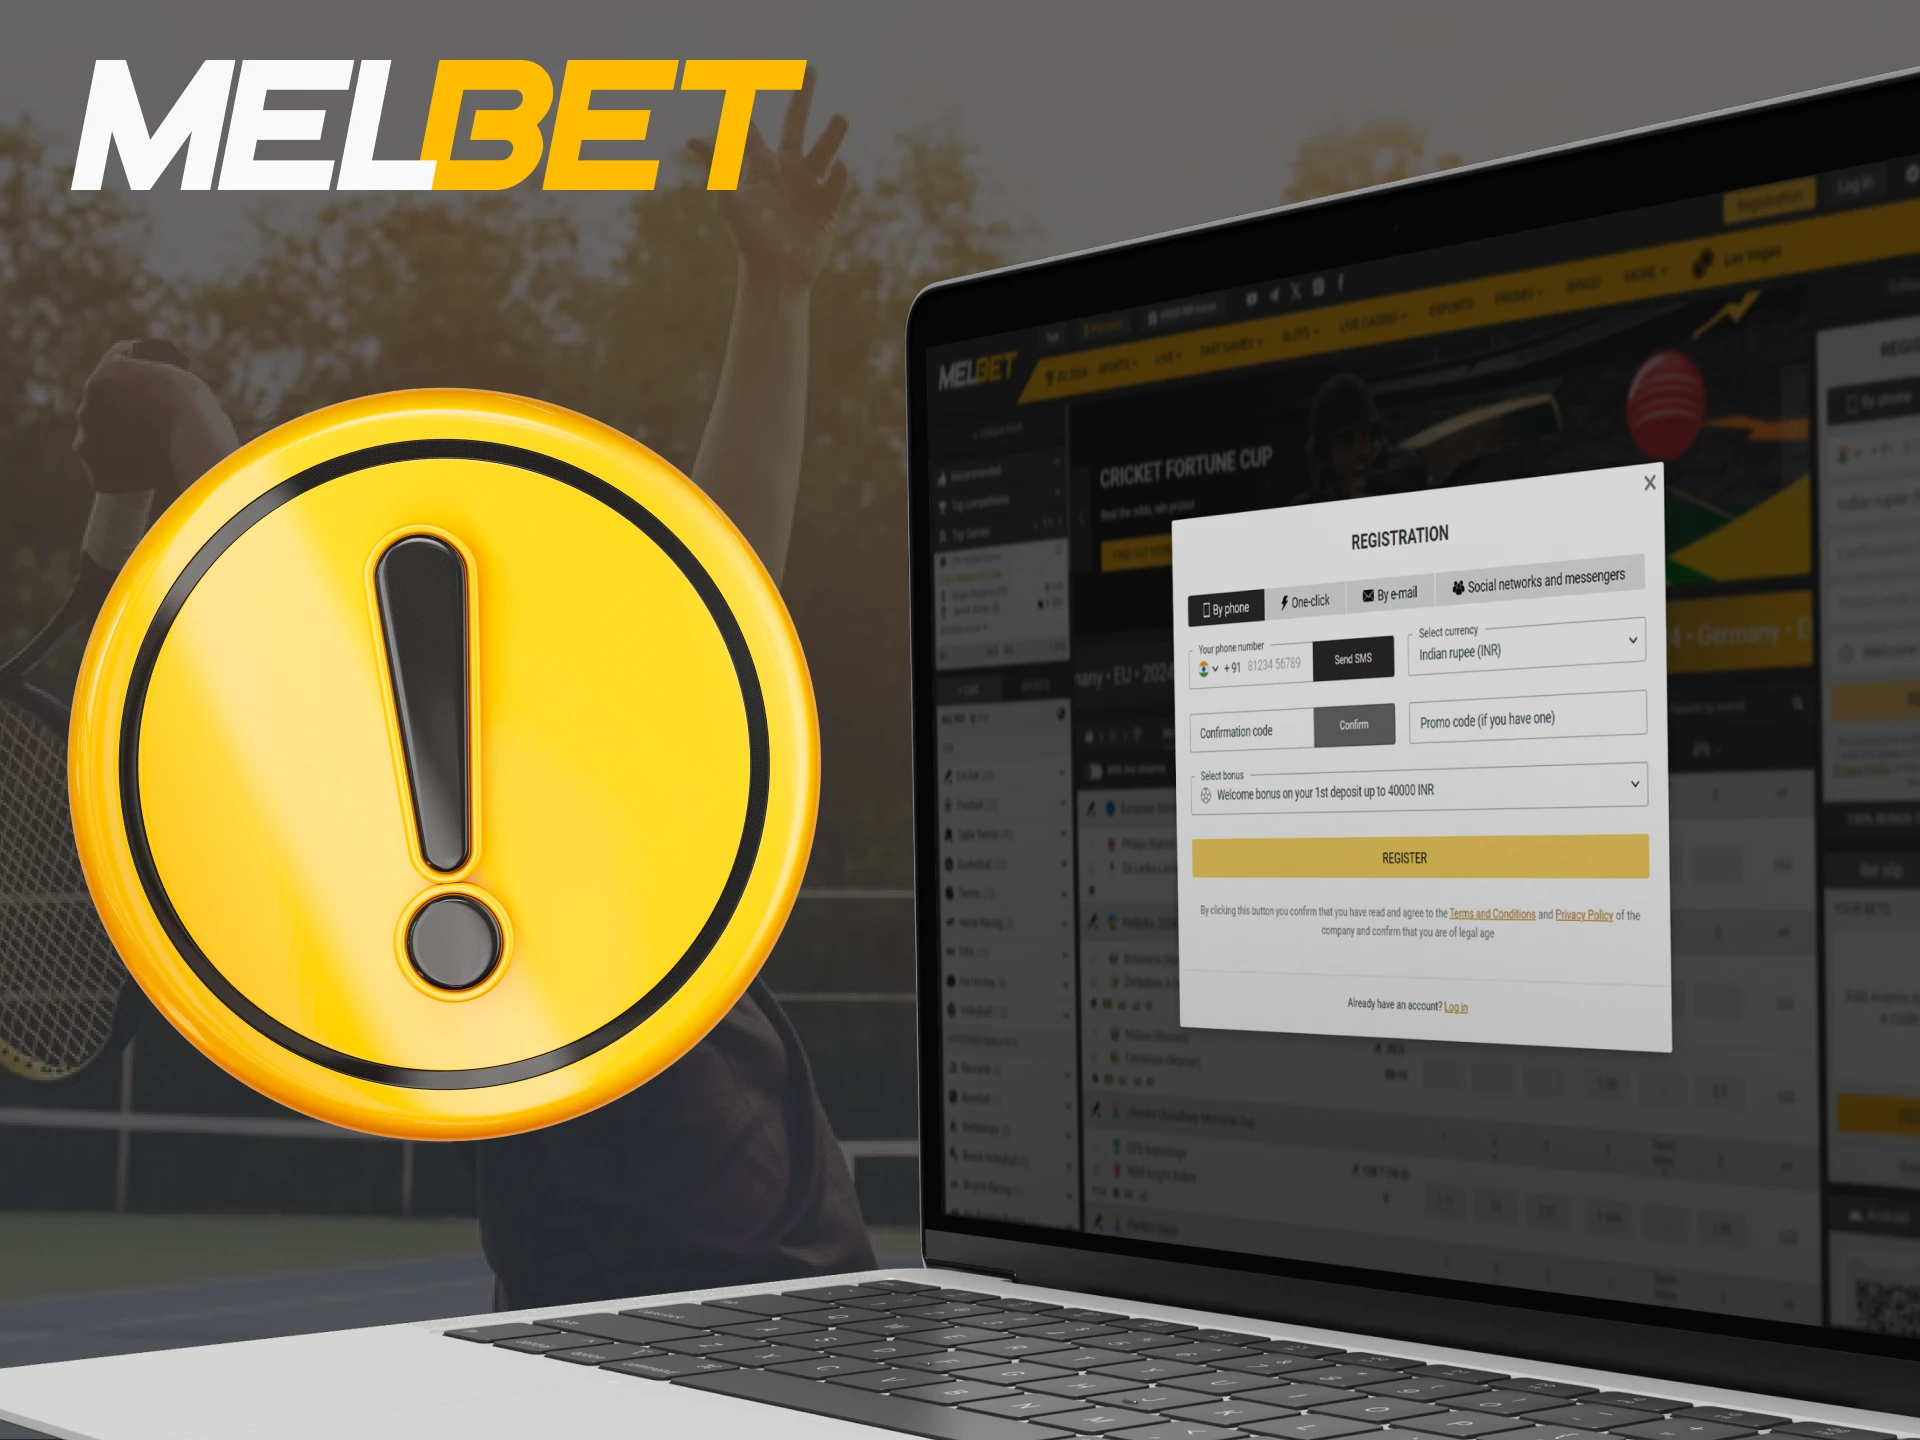 Here are the main problems you may encounter when using Melbet.